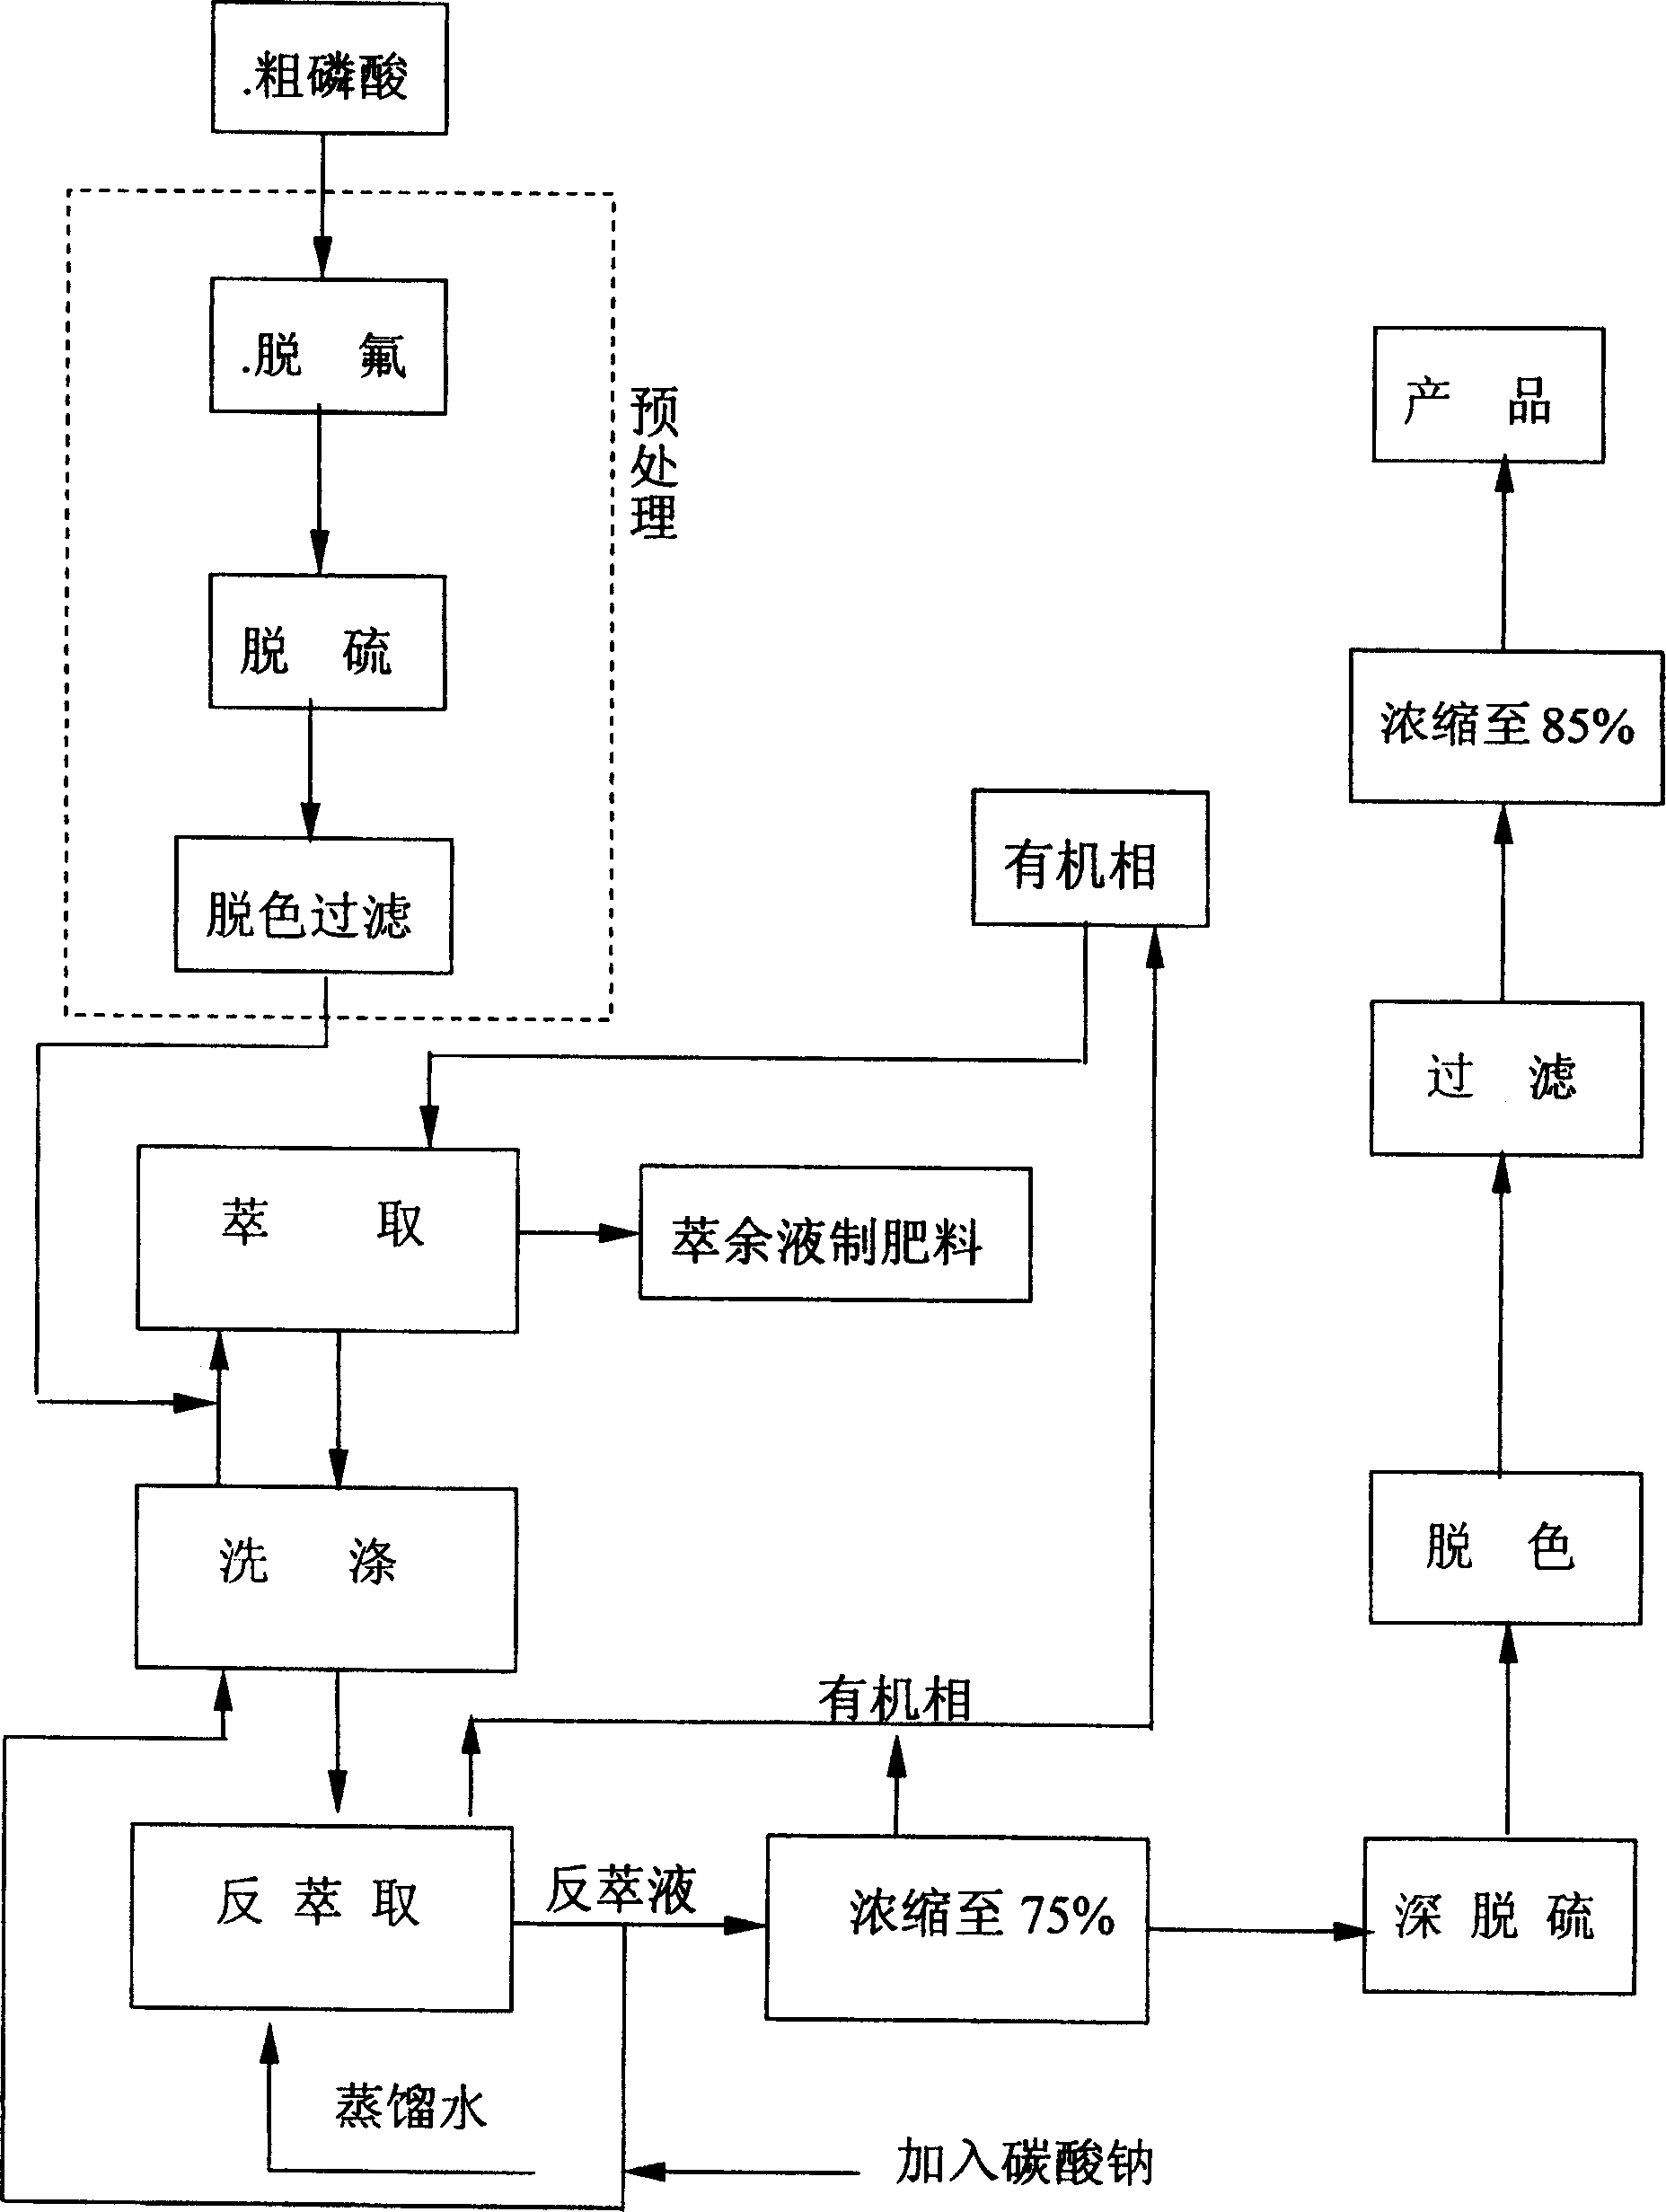 Method of solvent extraction purification of wet method phosphoric acid produced from medium and low grade phosphosus ore